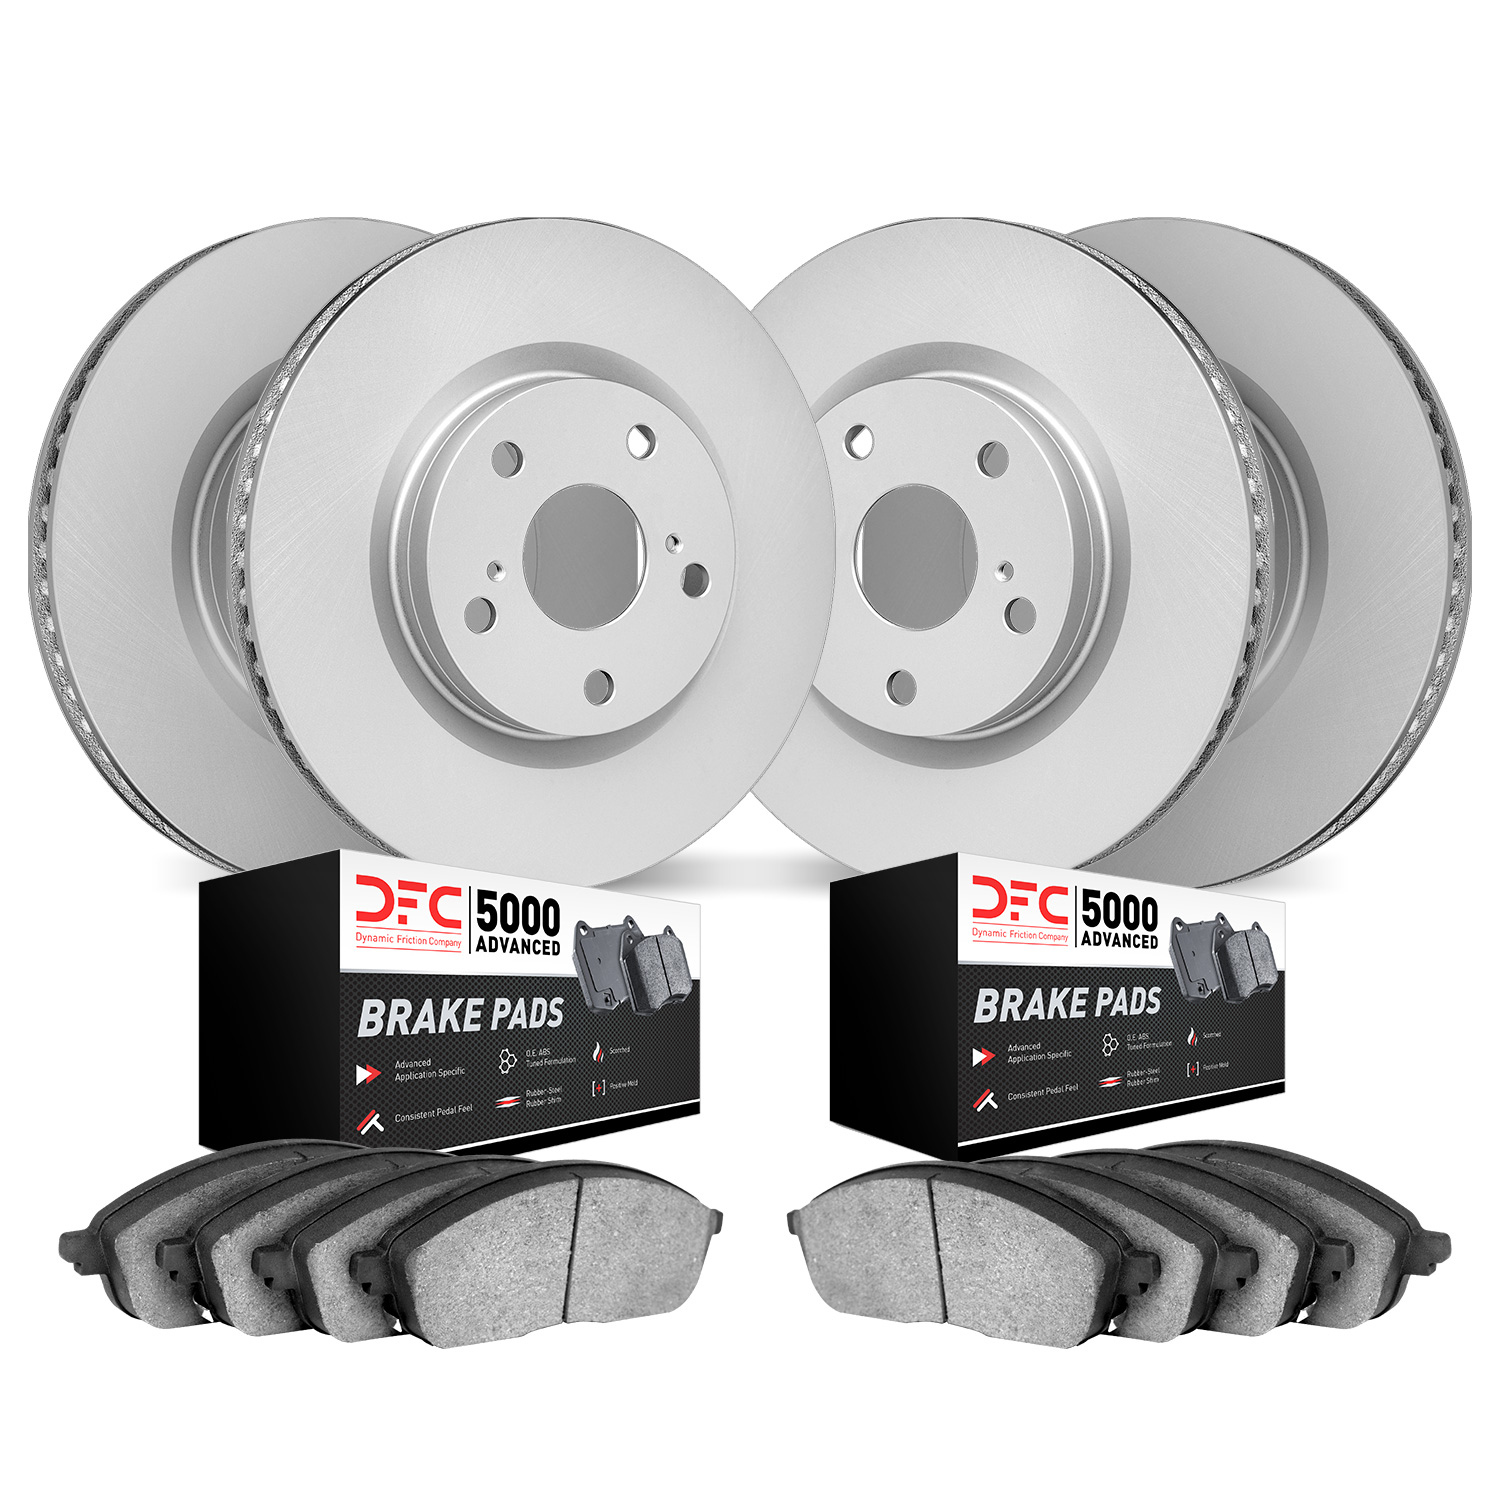 4504-31137 Geospec Brake Rotors w/5000 Advanced Brake Pads Kit, Fits Select BMW, Position: Front and Rear